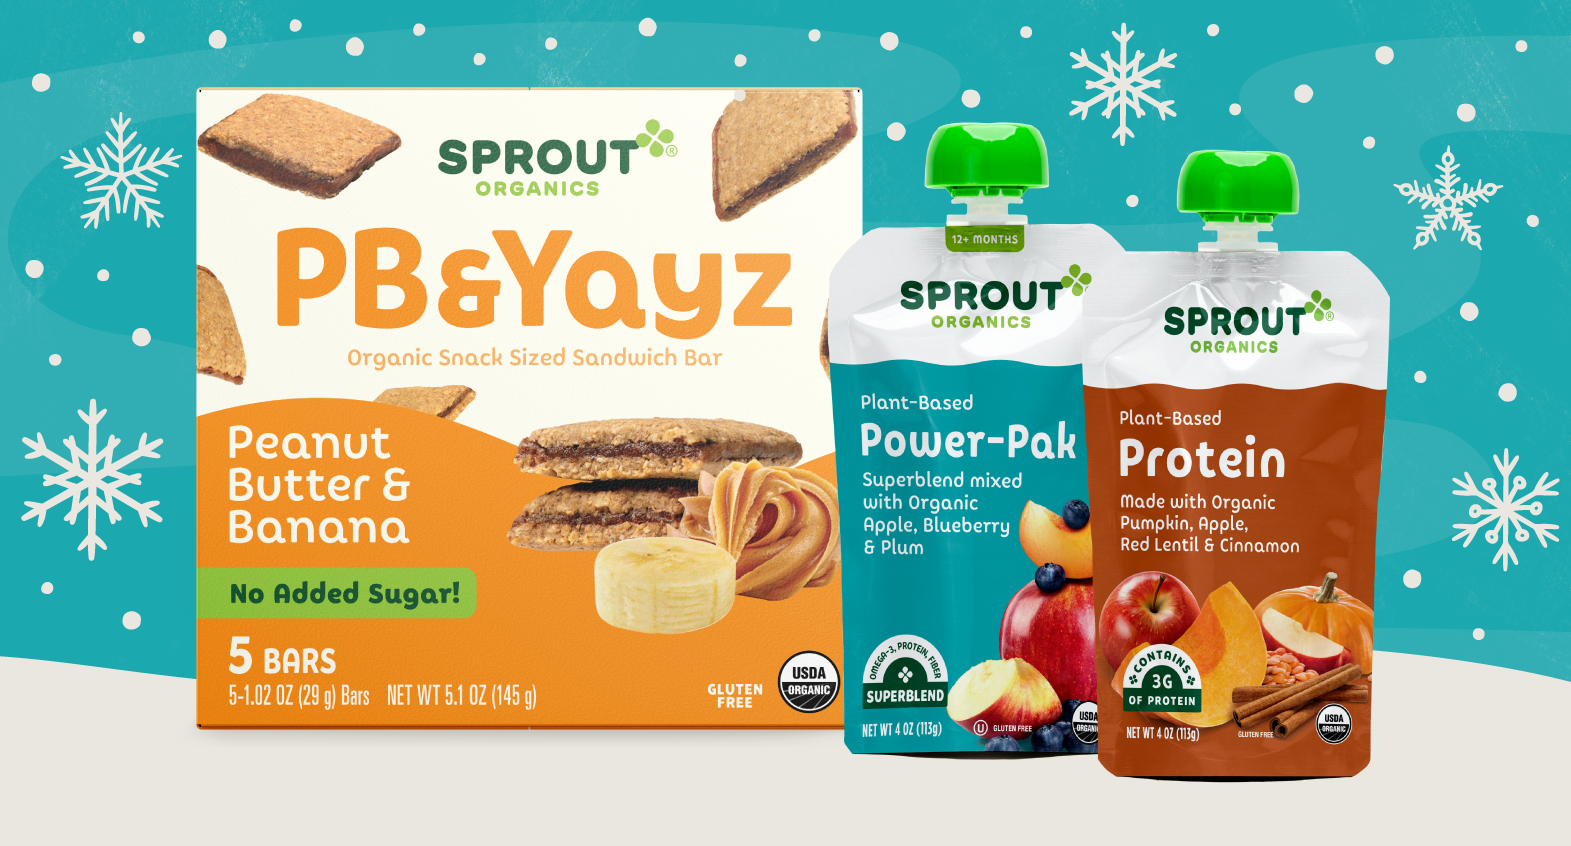 sprout organics products on an illustrated snowy background